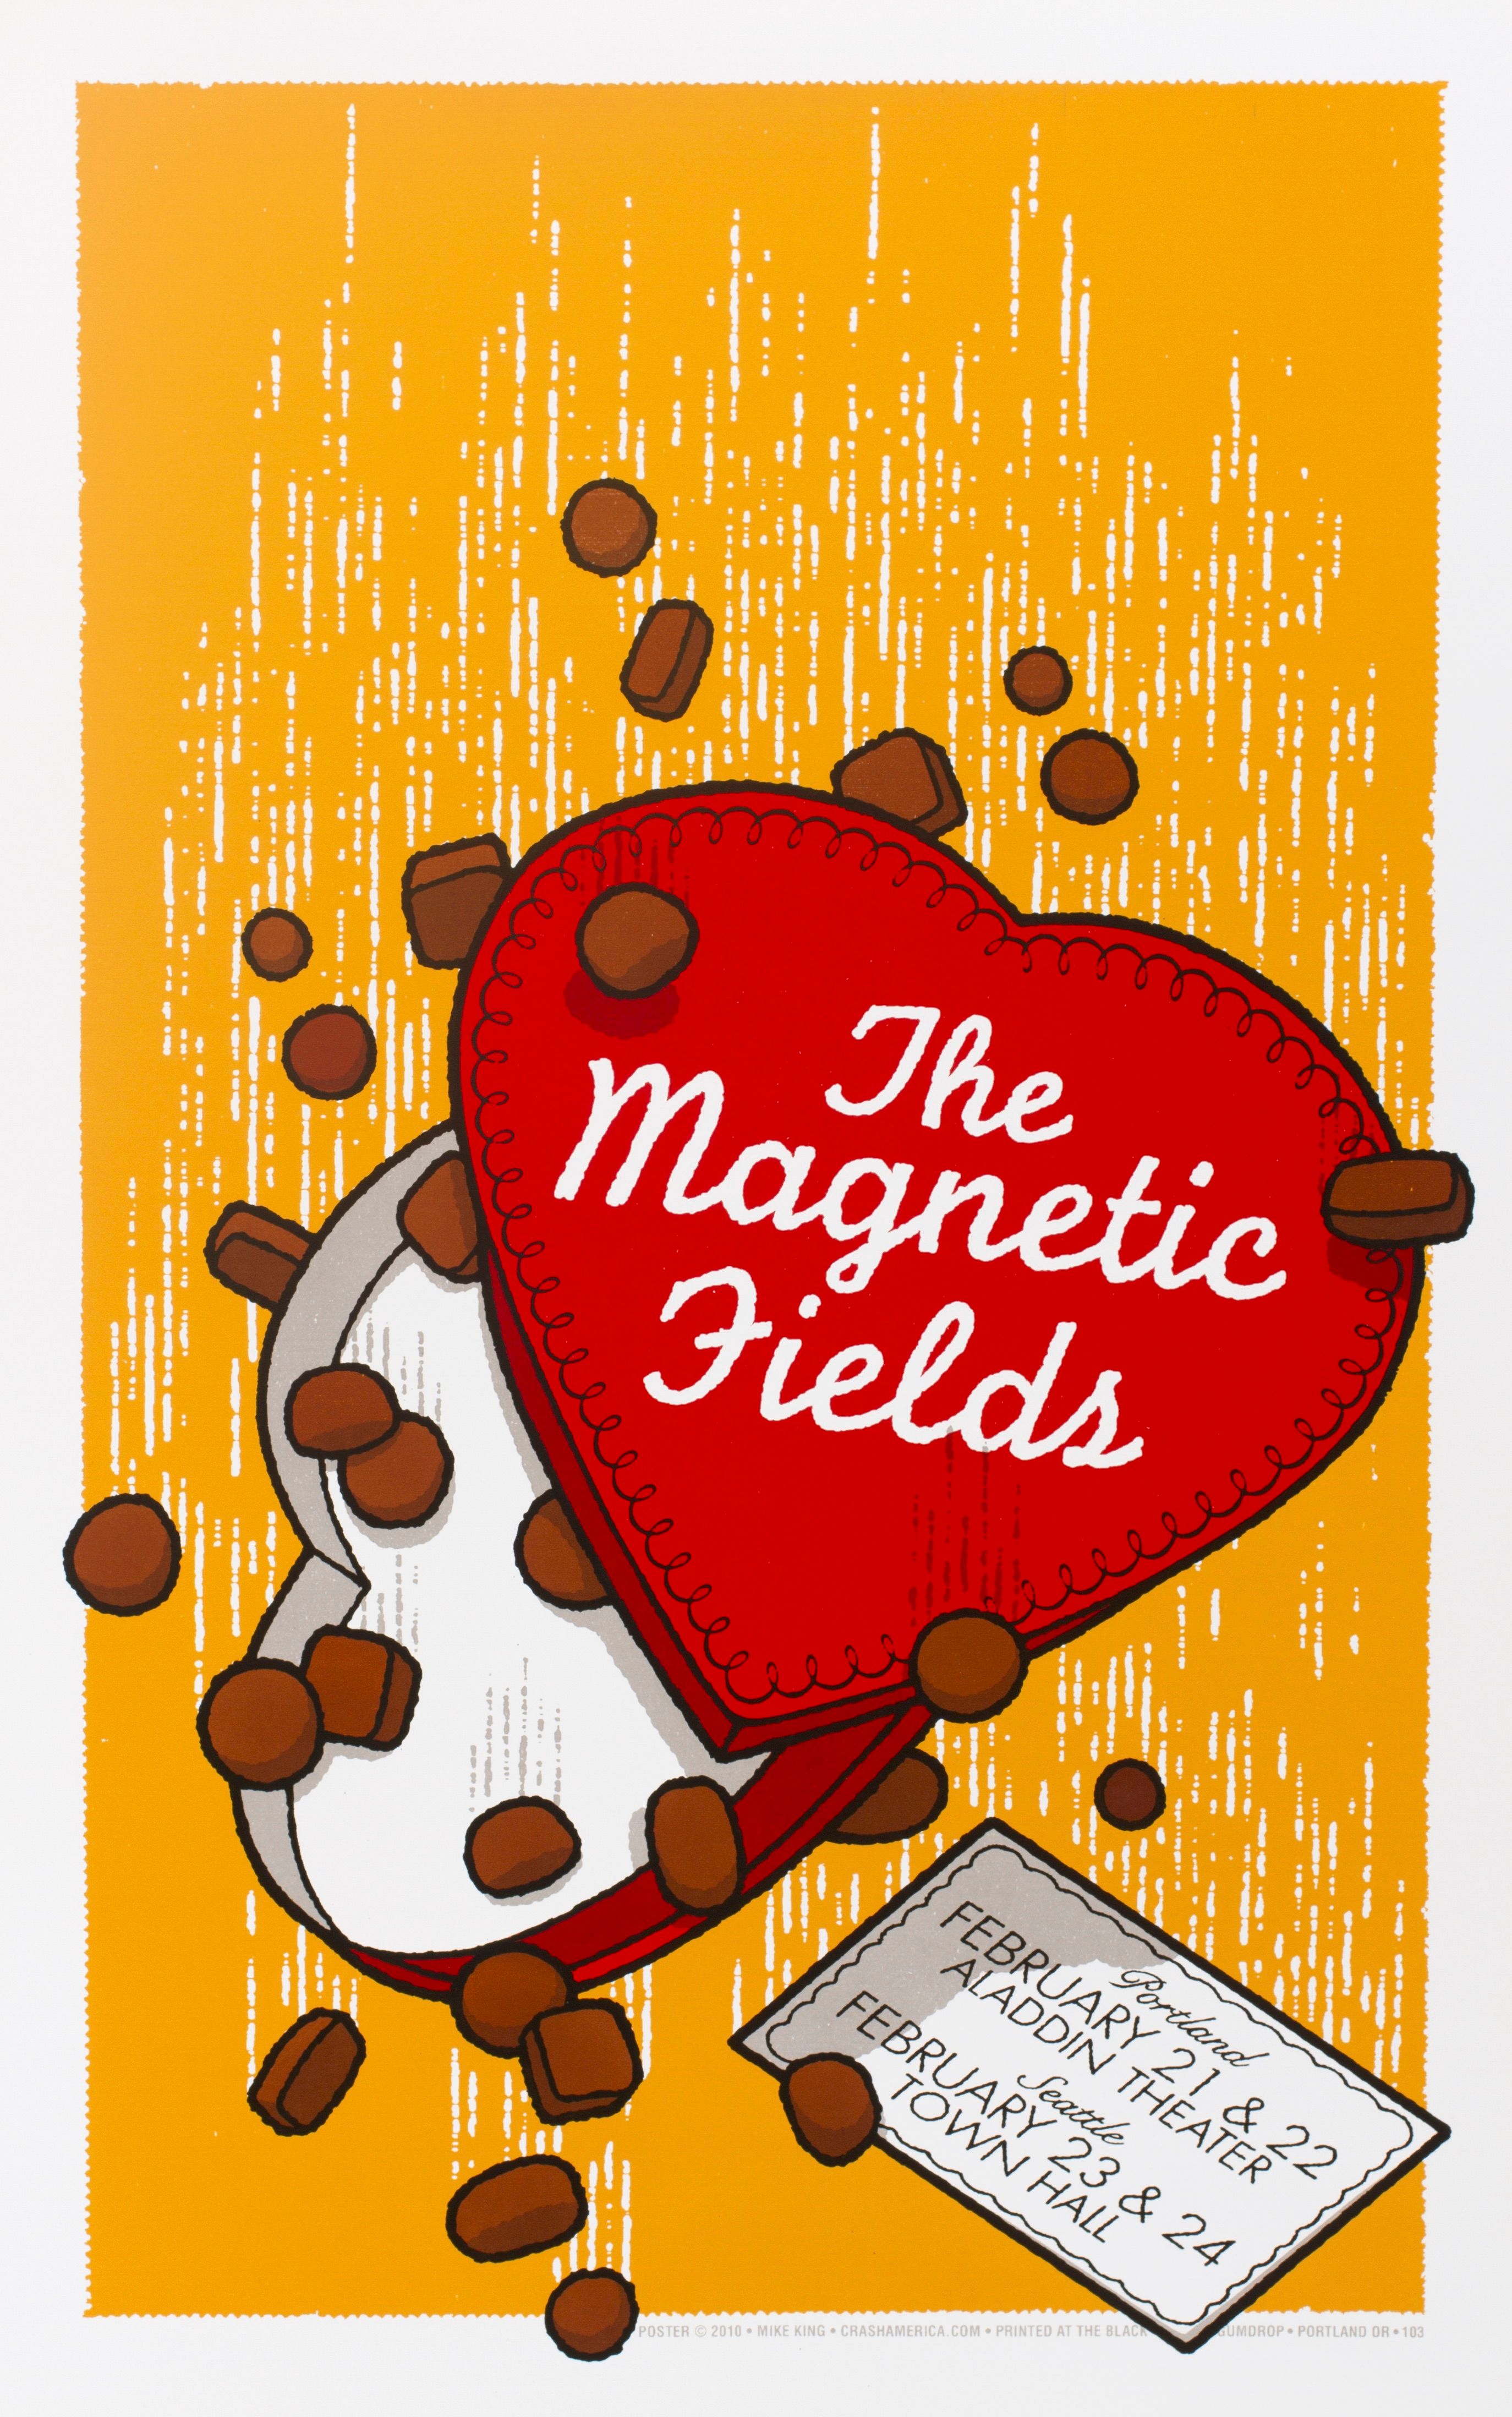 MXP-233.1 Magnetic Fields 2010 Aladdin Theater / Town Hall  Feb 24 Concert Poster